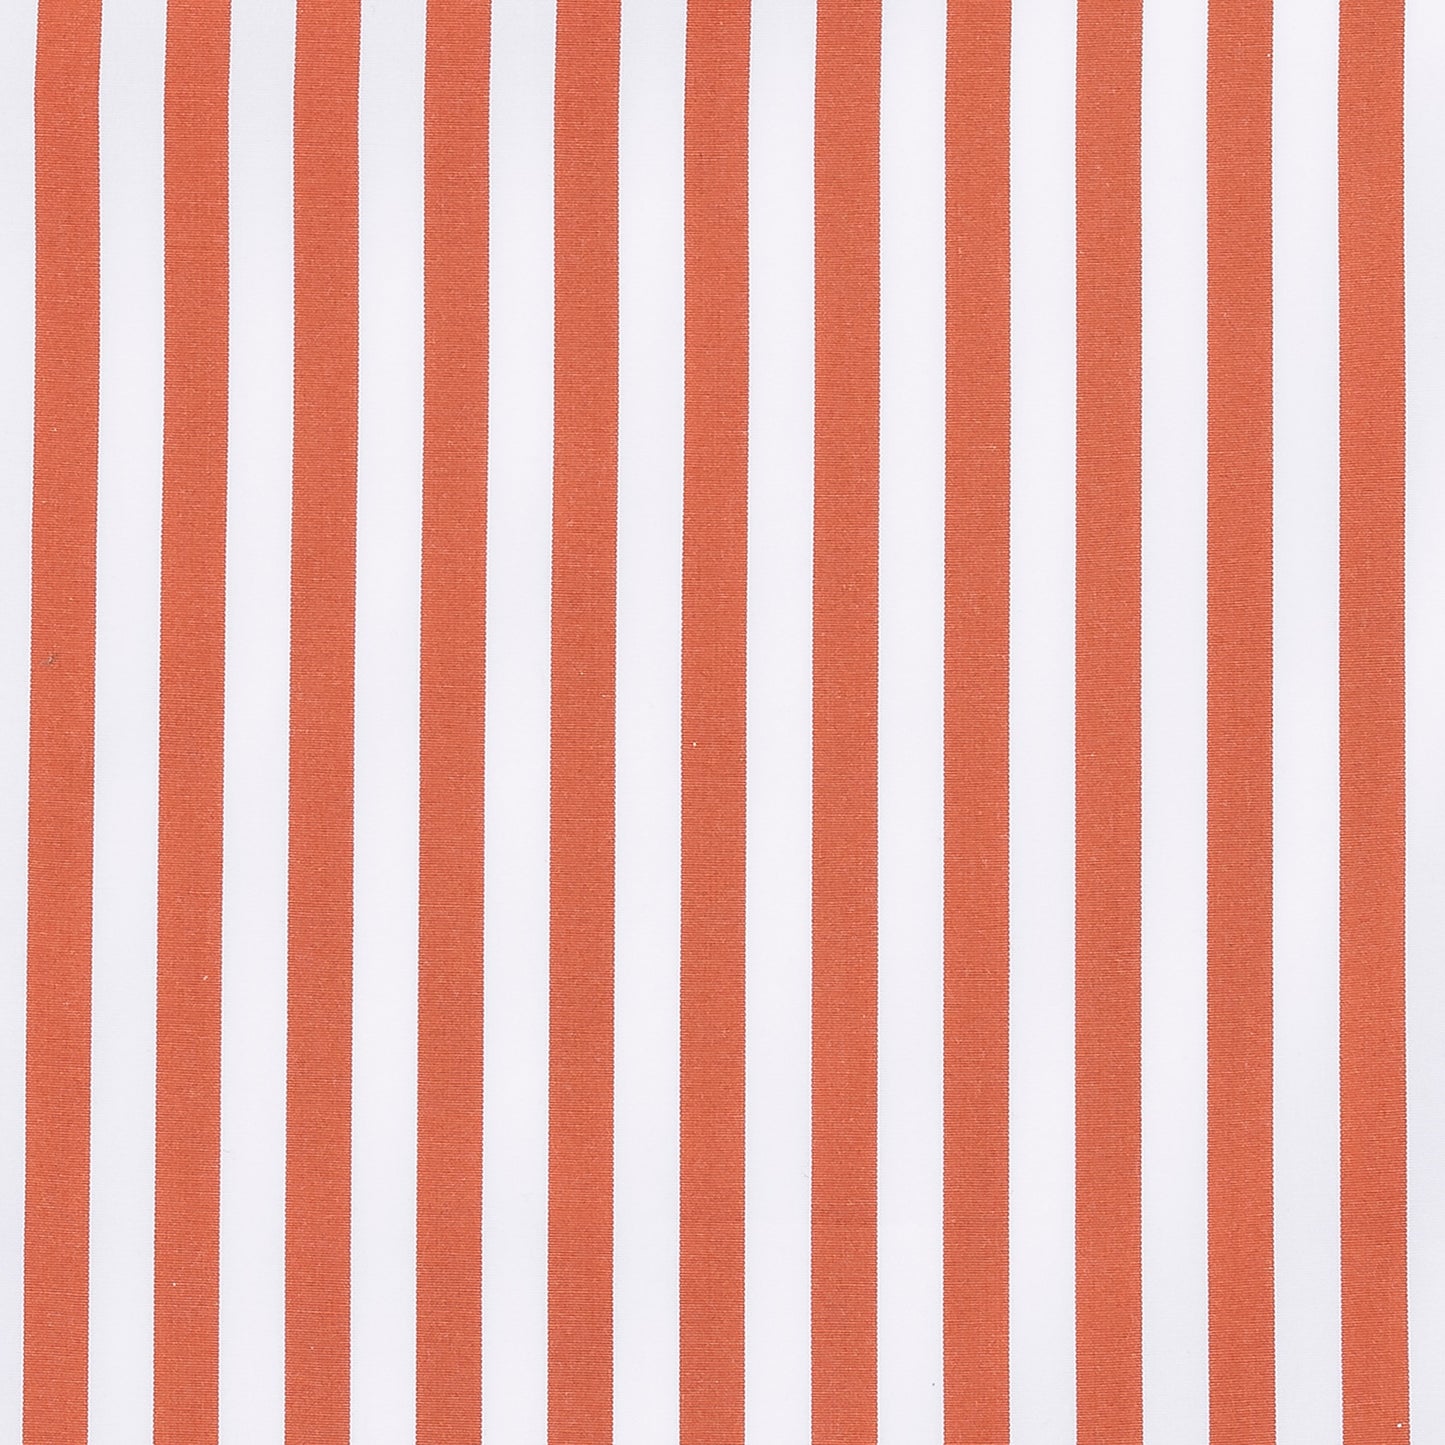 Rust Go With It orange and white striped pattern